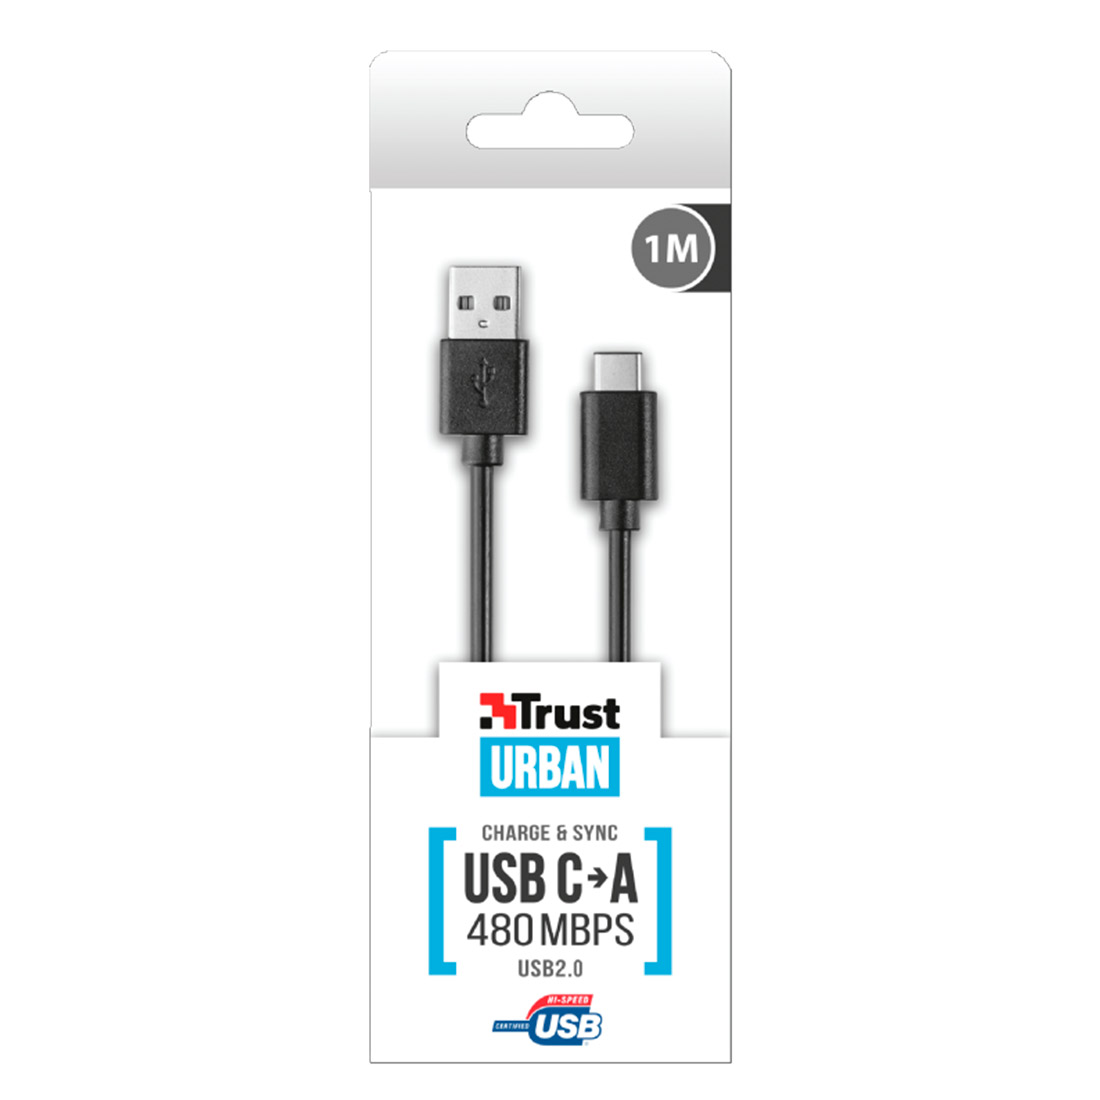 Cable TRUST tipo C USB 2.0 480Mbps 1m